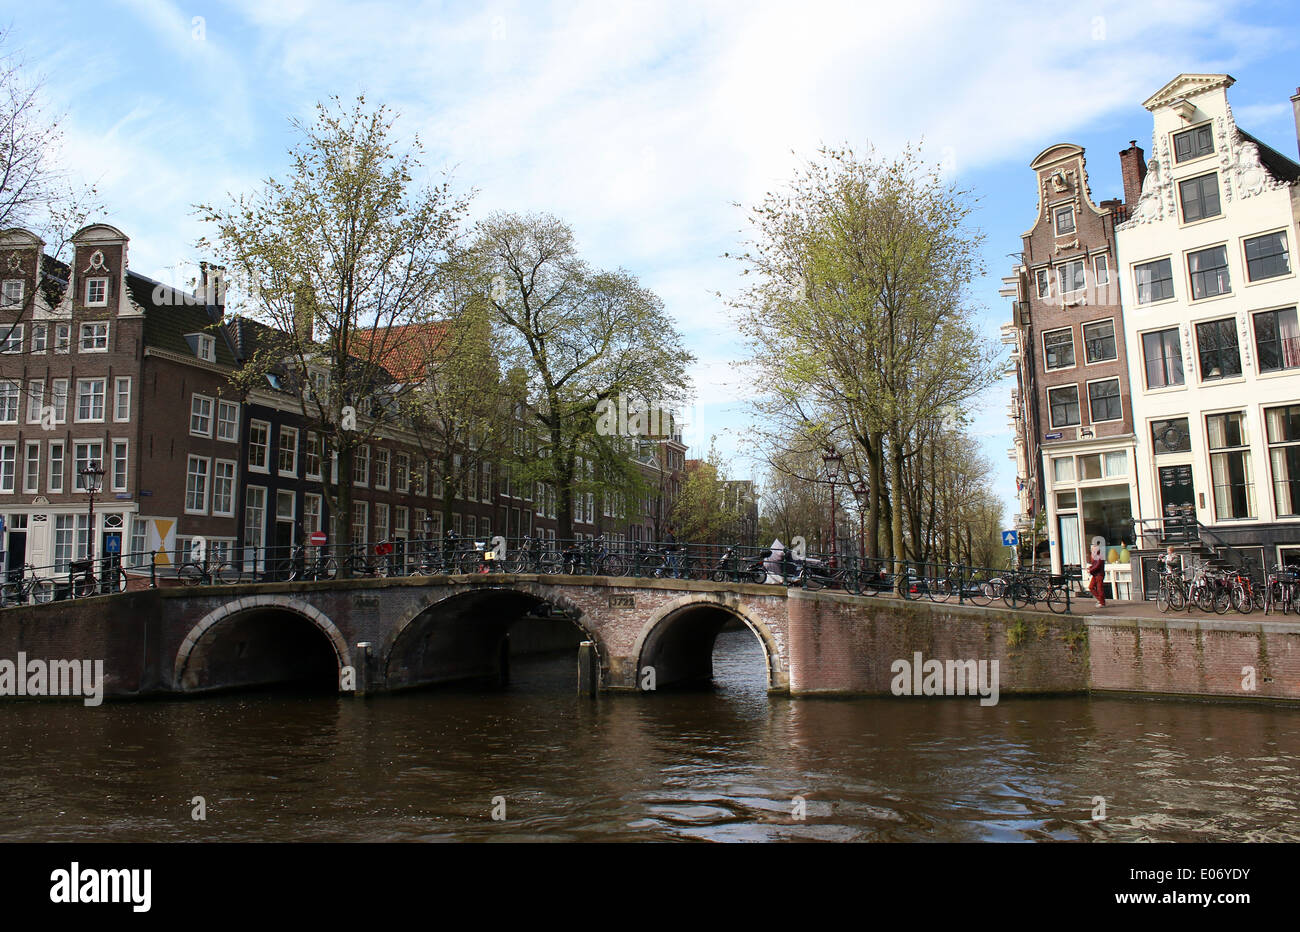 Old stone city bridge at the junction of Herengracht and Leidsegracht canal in Amsterdam (stictched panorama) Stock Photo